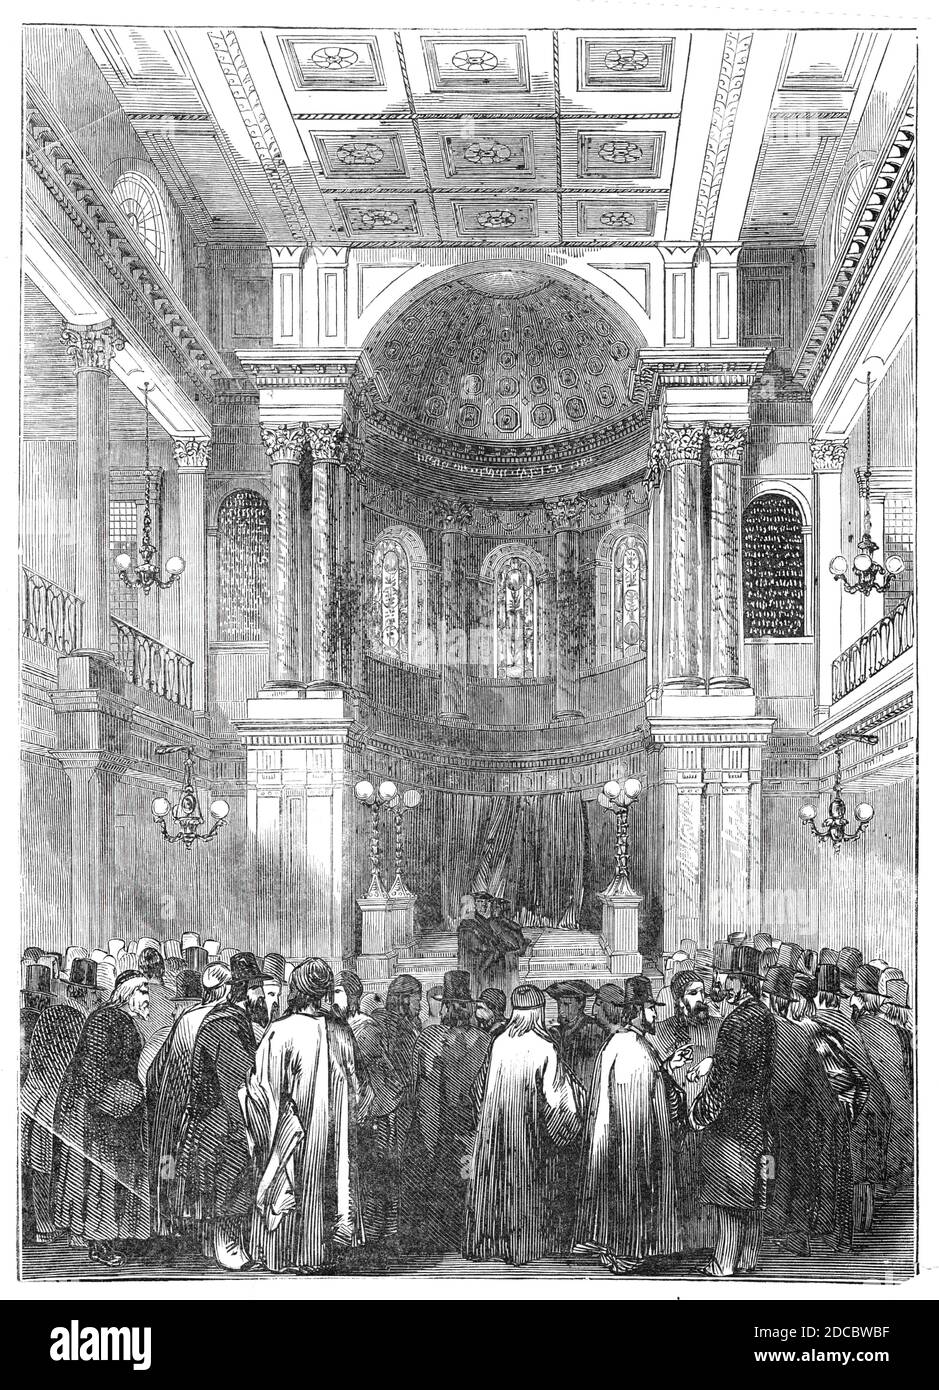 Election of Rabbi, at the Synagogue, Great St. Helen's, 1844. Scene at Bishopsgate Street, City of London, when the Reverend Doctor Nathan Marcus Adler was chosen as Orthodox Chief Rabbi of the British Empire. 'A multitude was present. A din of strange sounds saluted our ear...A strong eastern character was stamped on every countenance. Every man was recognised as a foreigner, and felt to be a Jew...every one spoke of Dr. Adler in terms of kindness. He was said to be a learned man, strongly given to philosophic inquiry, and more deeply affected with the spirituality of religious observances th Stock Photo